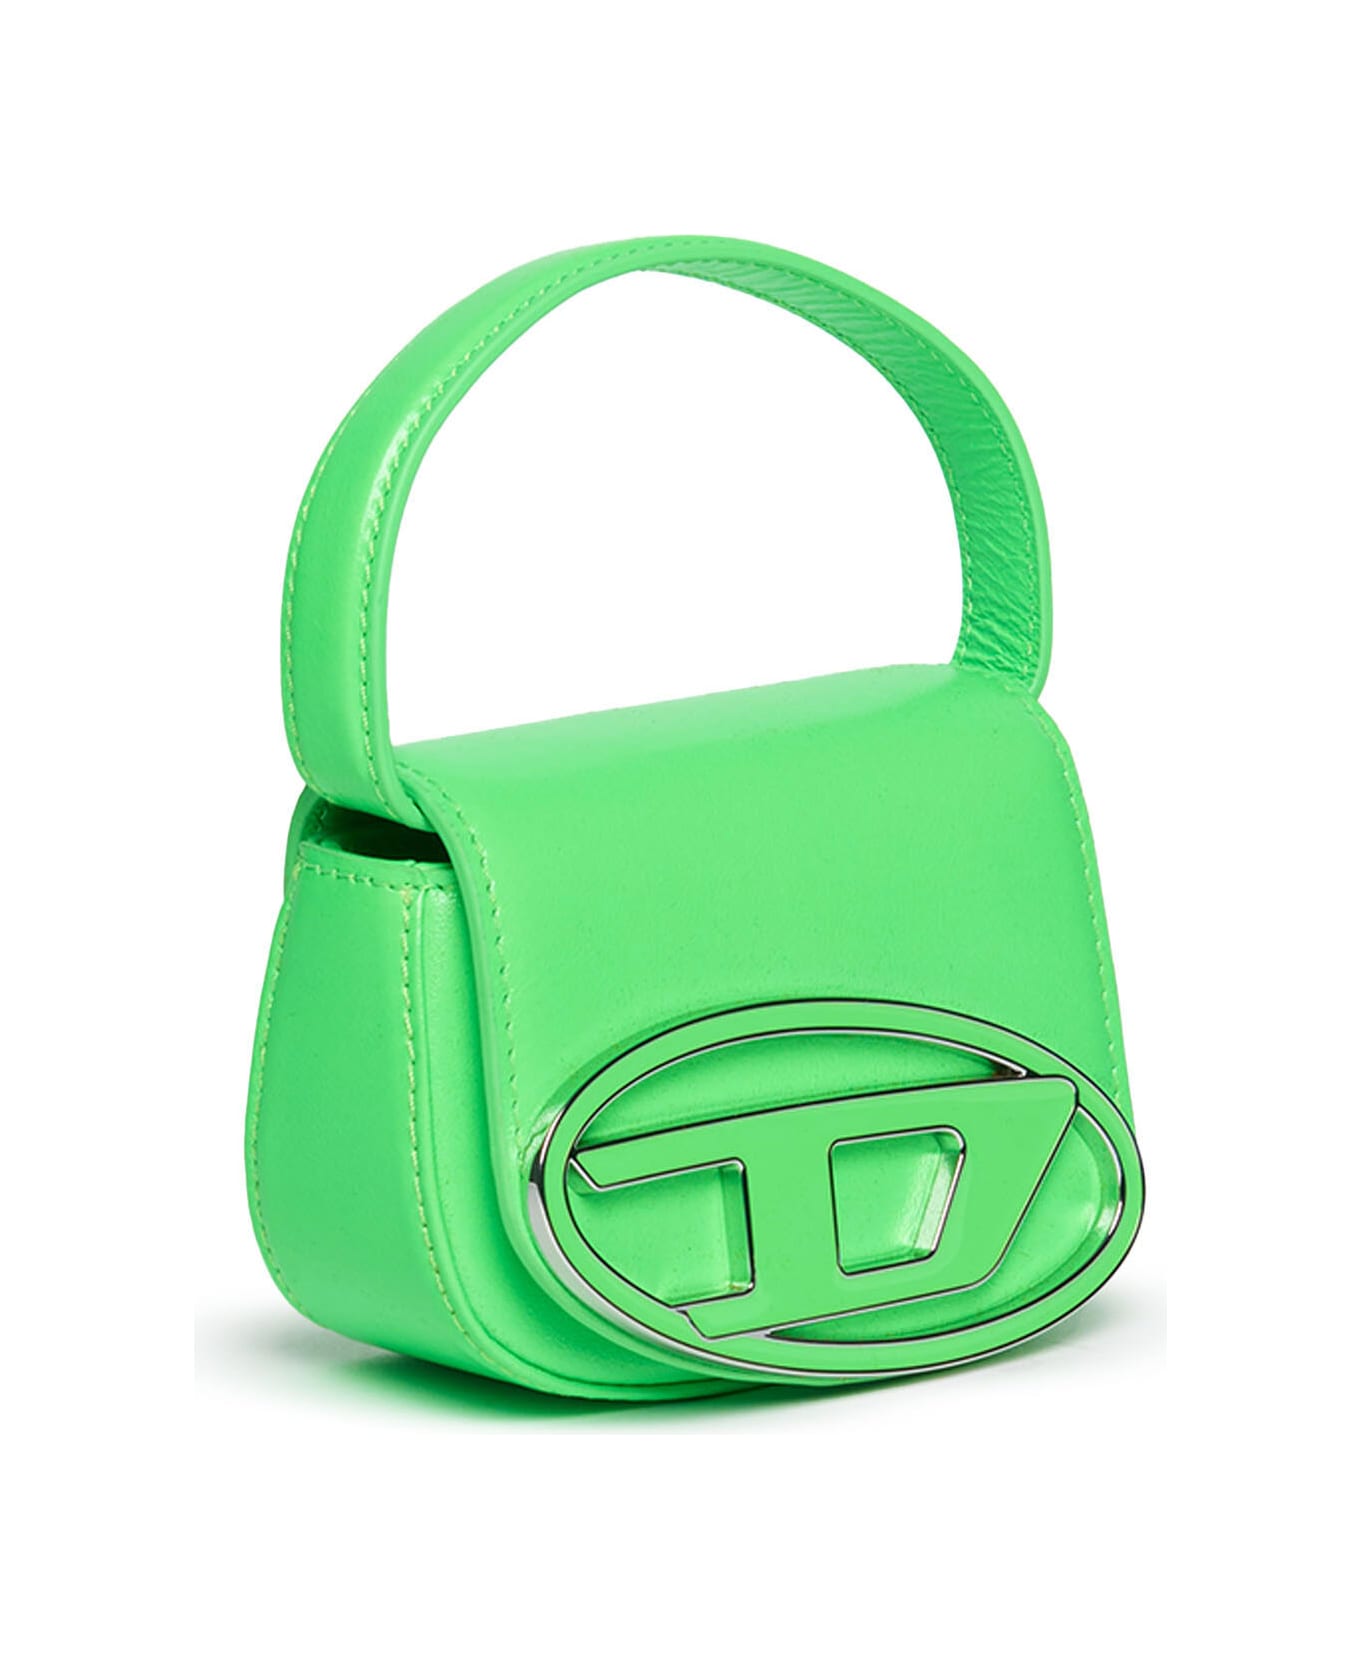 Diesel 1dr Xs Bags Diesel 1dr Xs Bag In Fluo Imitation Leather